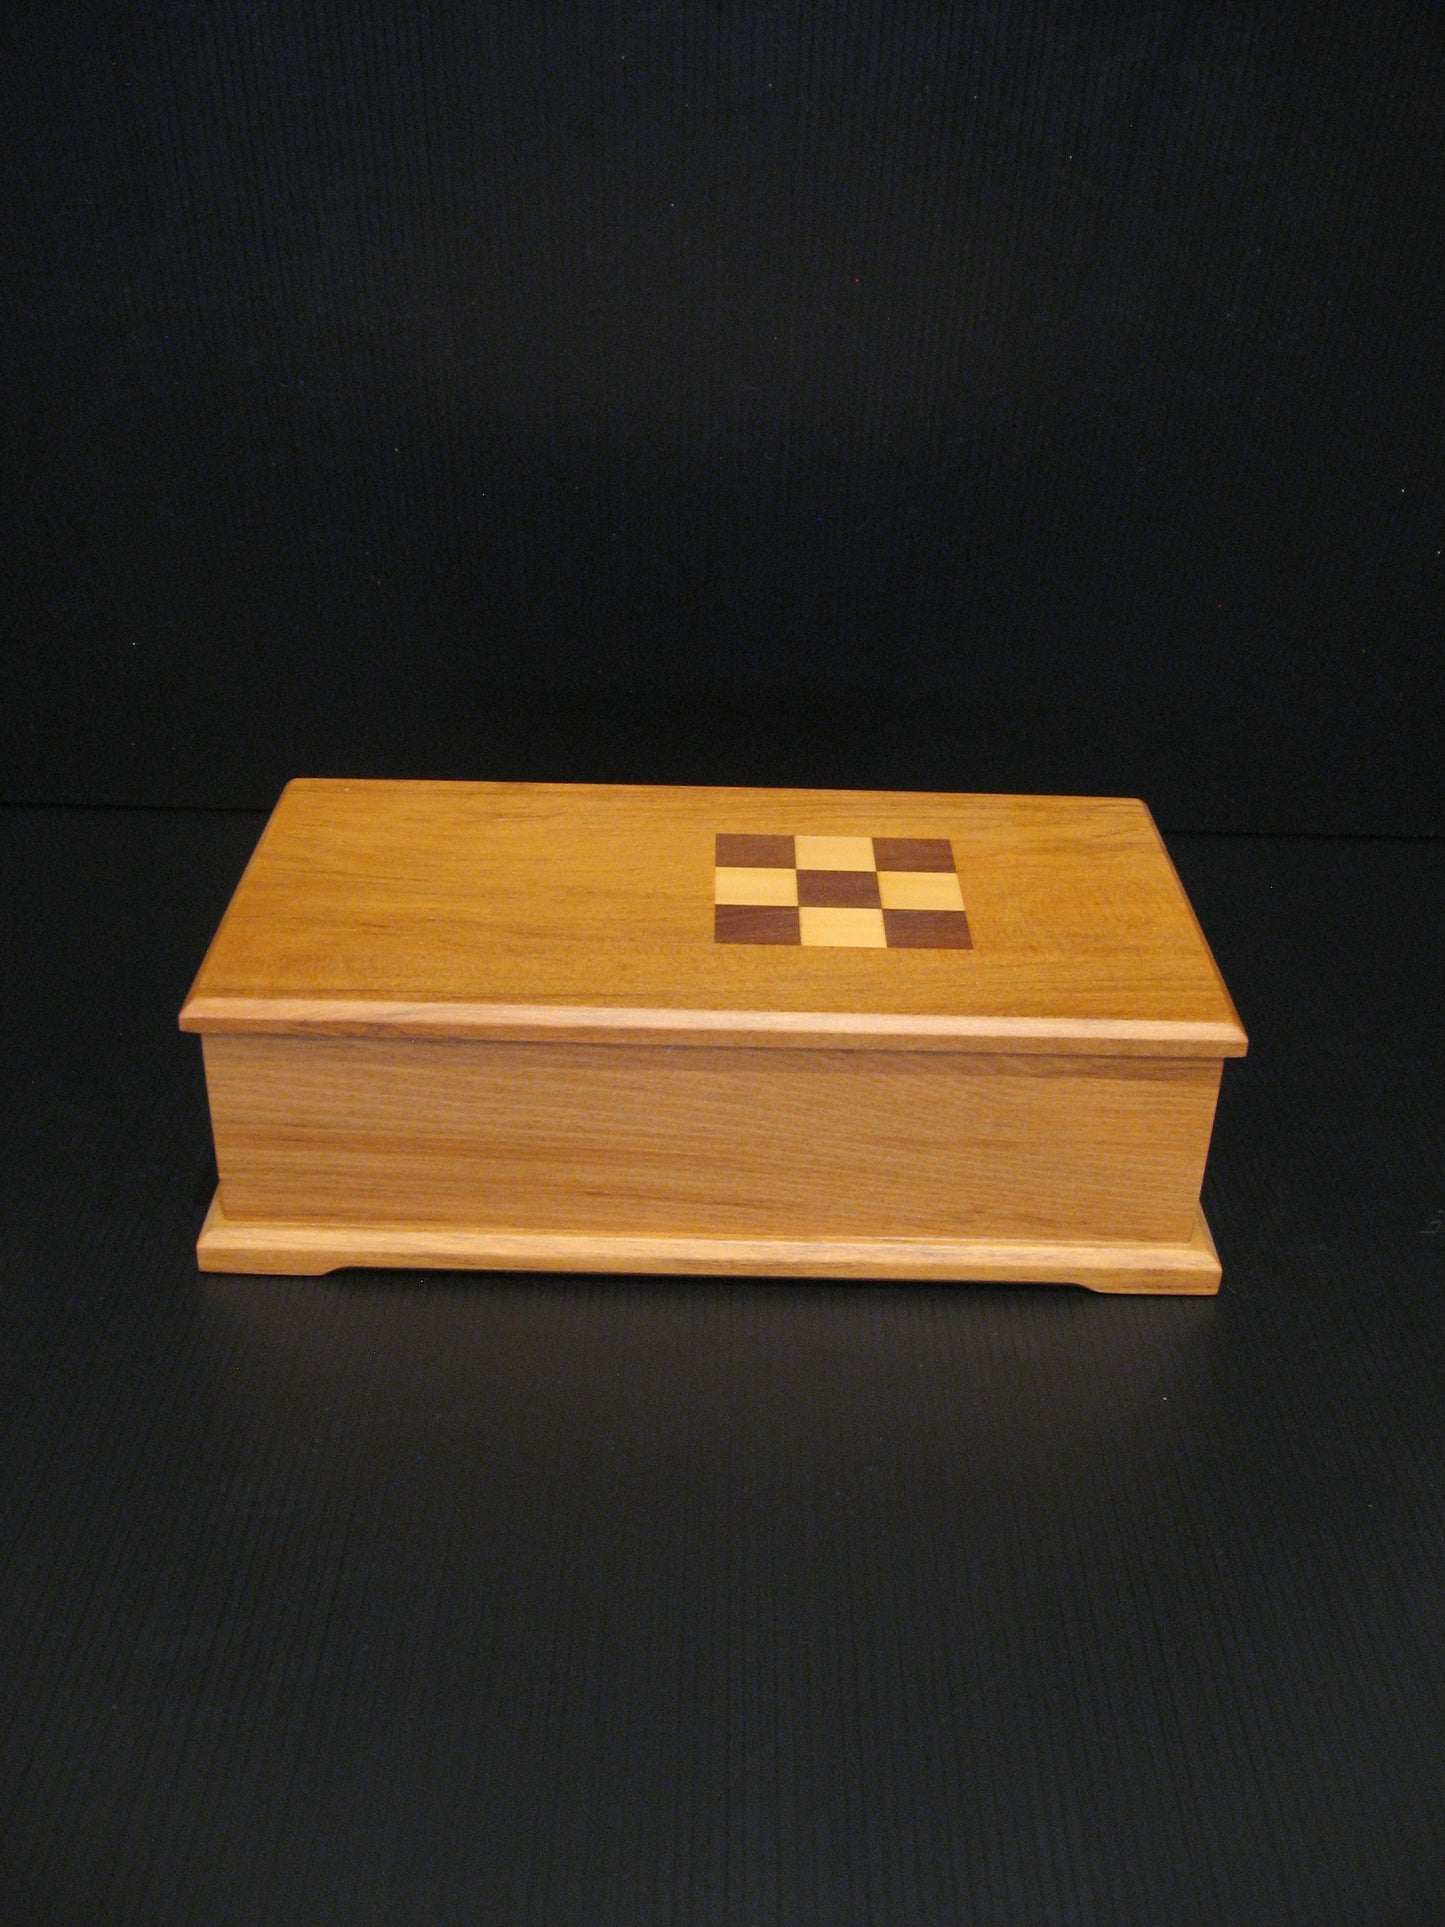 Rimu Patterned Wooden Box by Timber Arts of New Zealand Silver Fern Gallery